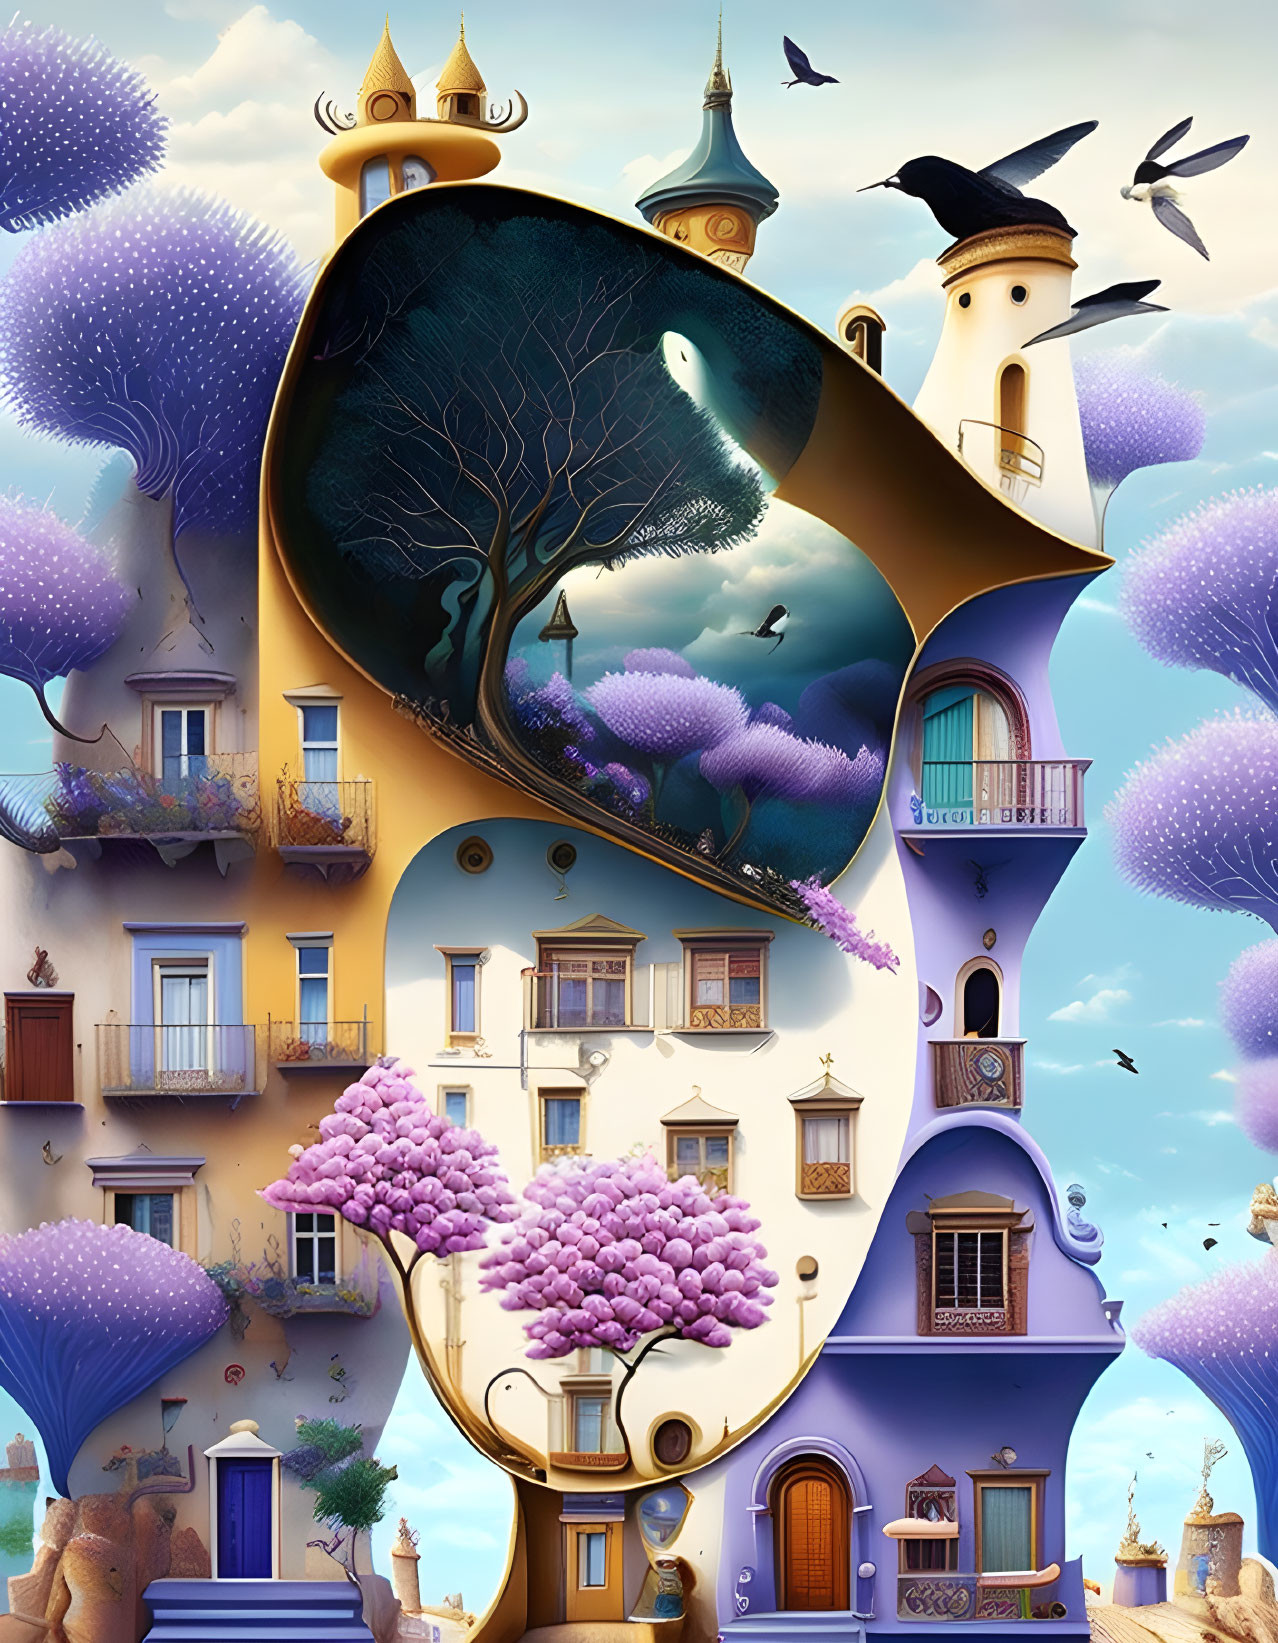 Surreal architectural artwork with vibrant colors and playful birds